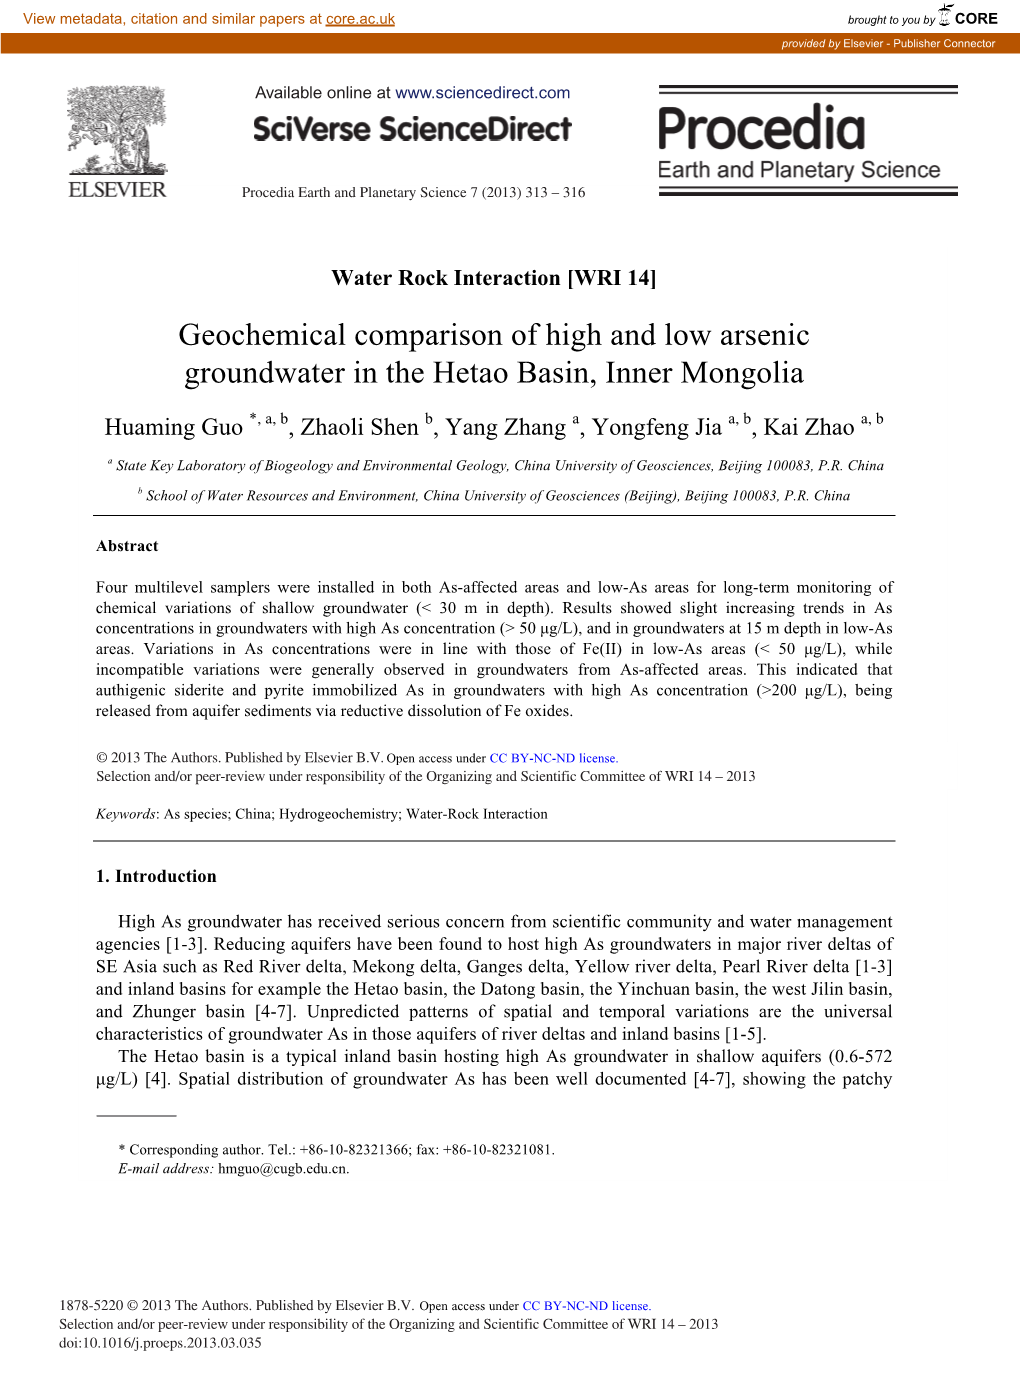 Geochemical Comparison of High and Low Arsenic Groundwater in the Hetao Basin, Inner Mongolia